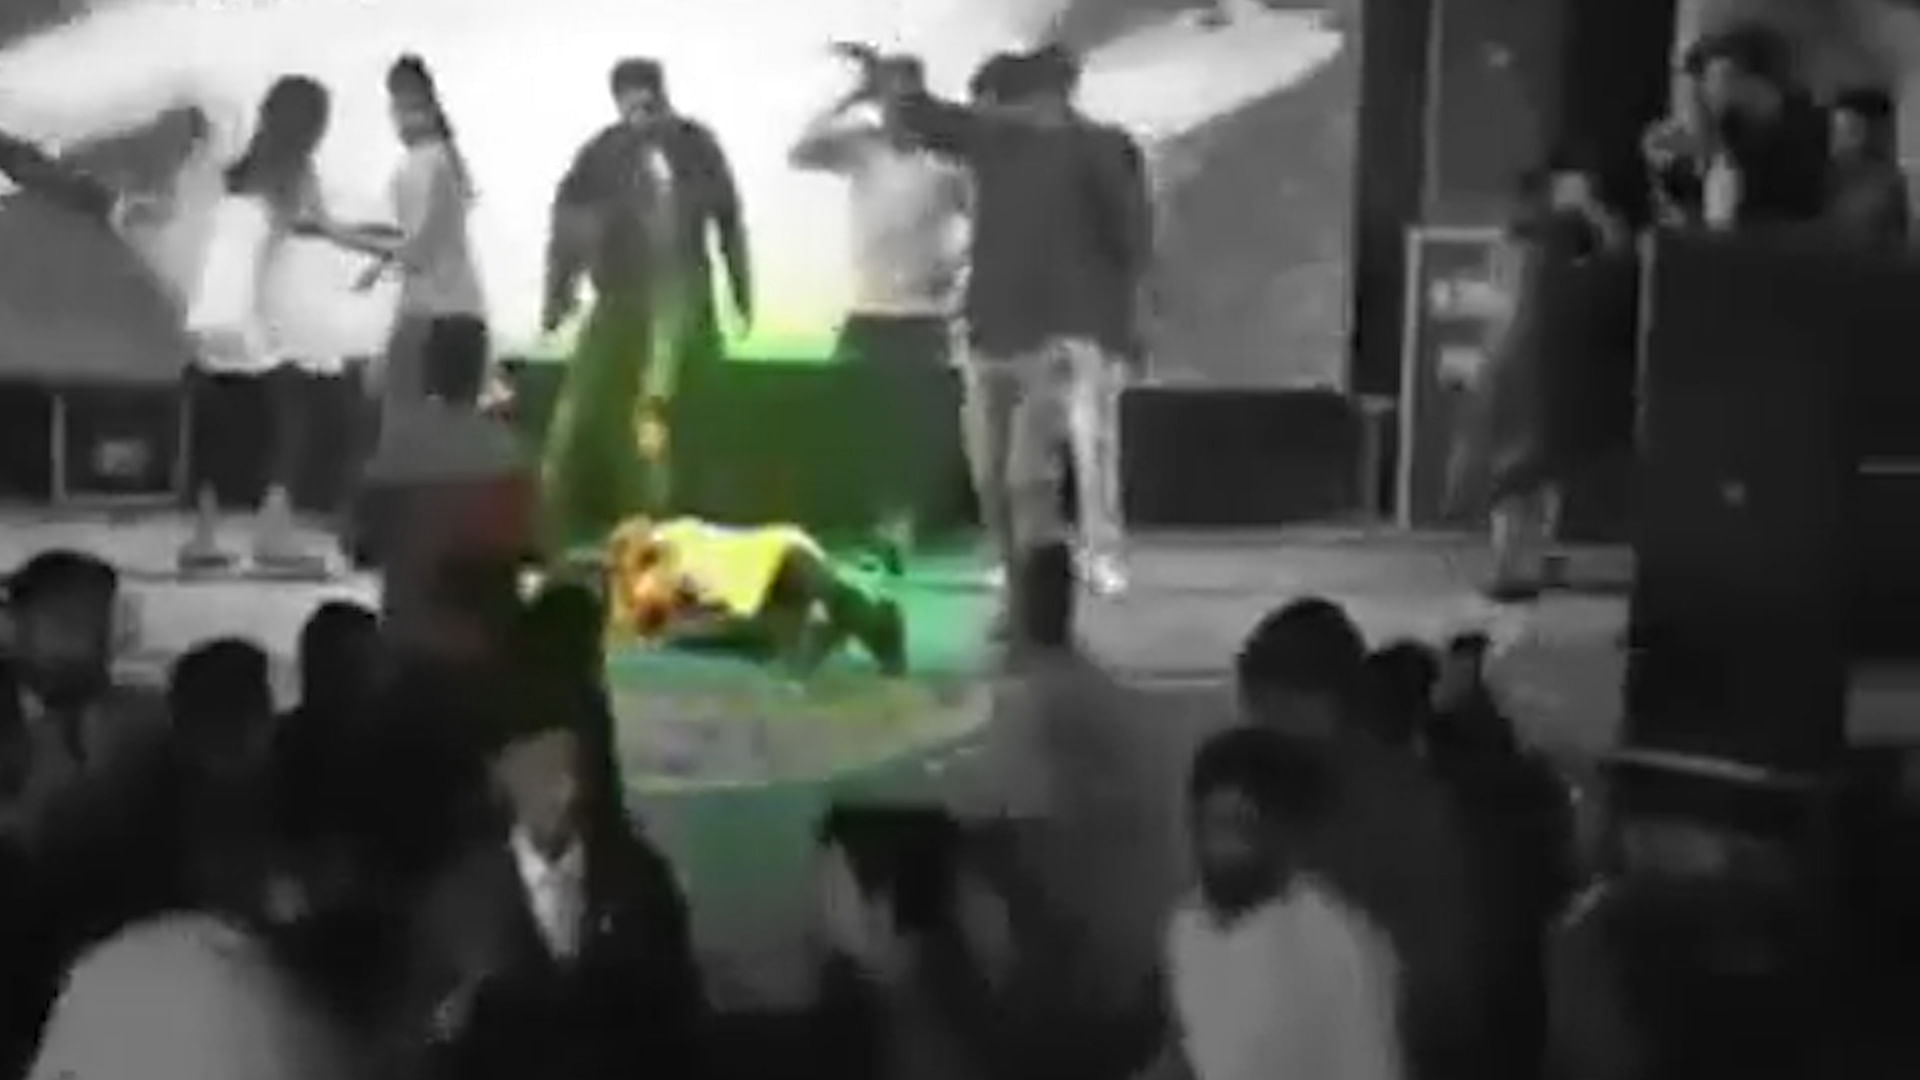 A 22-year-old dancer at a marriage function in Punjab’s Bathinda district, was killed when a drunk man shot her. (Photo: ANI screengrab)